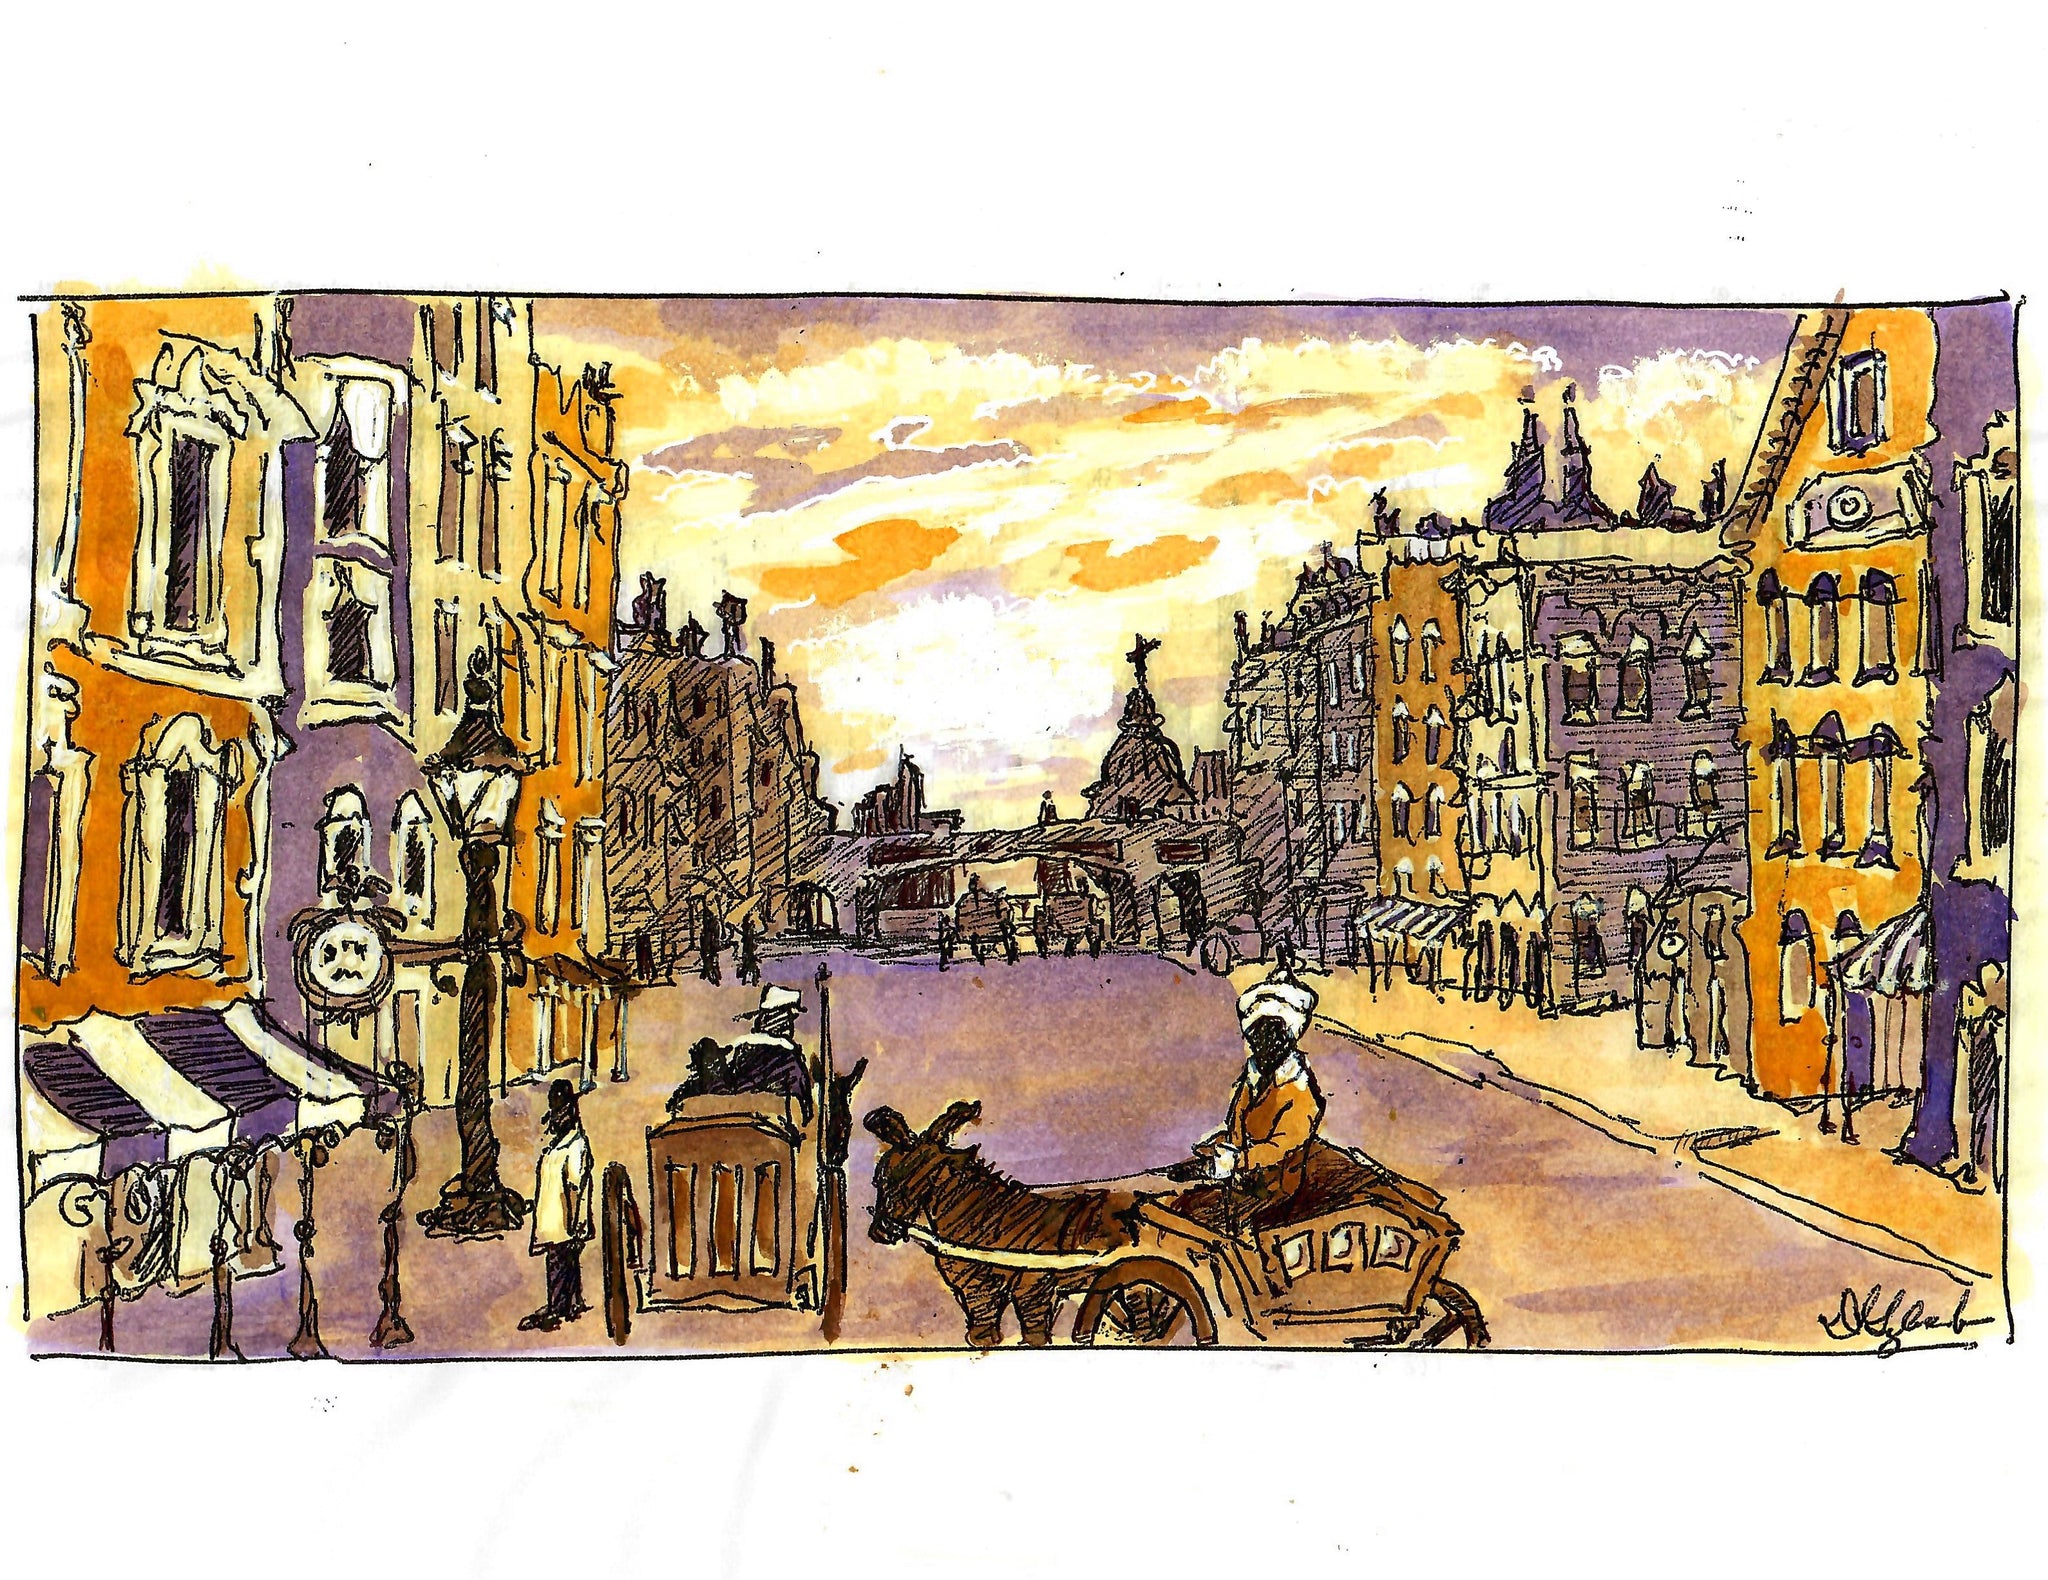 Old street scene (horses and carts) drawn in pen and ink and watercolored in two colors (yellow and purple) highlighted with whiteout.